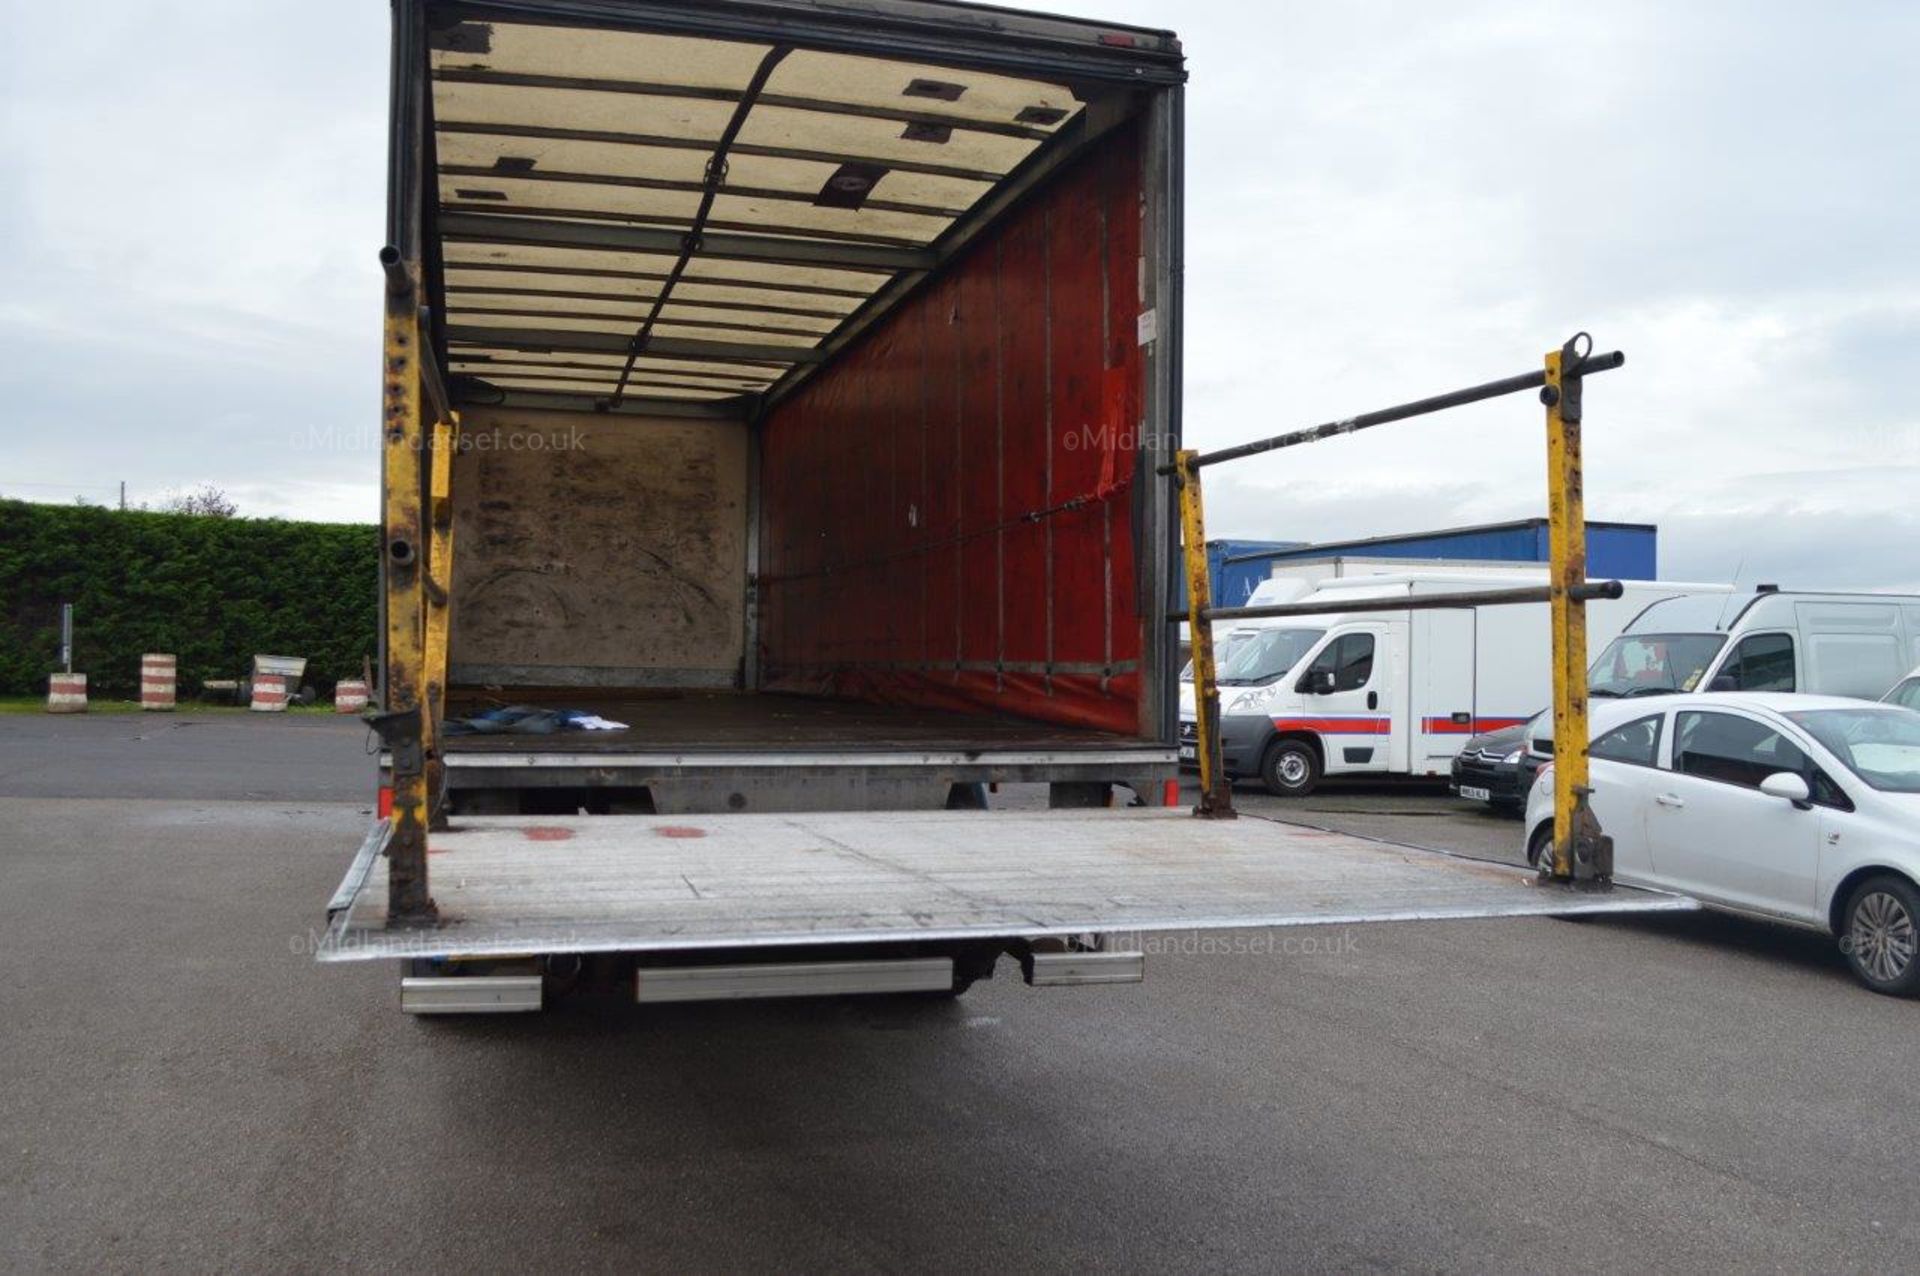 2008/58 REG RENAULT MIDLUM 18 TONNE CURTAIN SIDE LORRY WITH TAIL LIFT ONE OWNER - Image 18 of 24